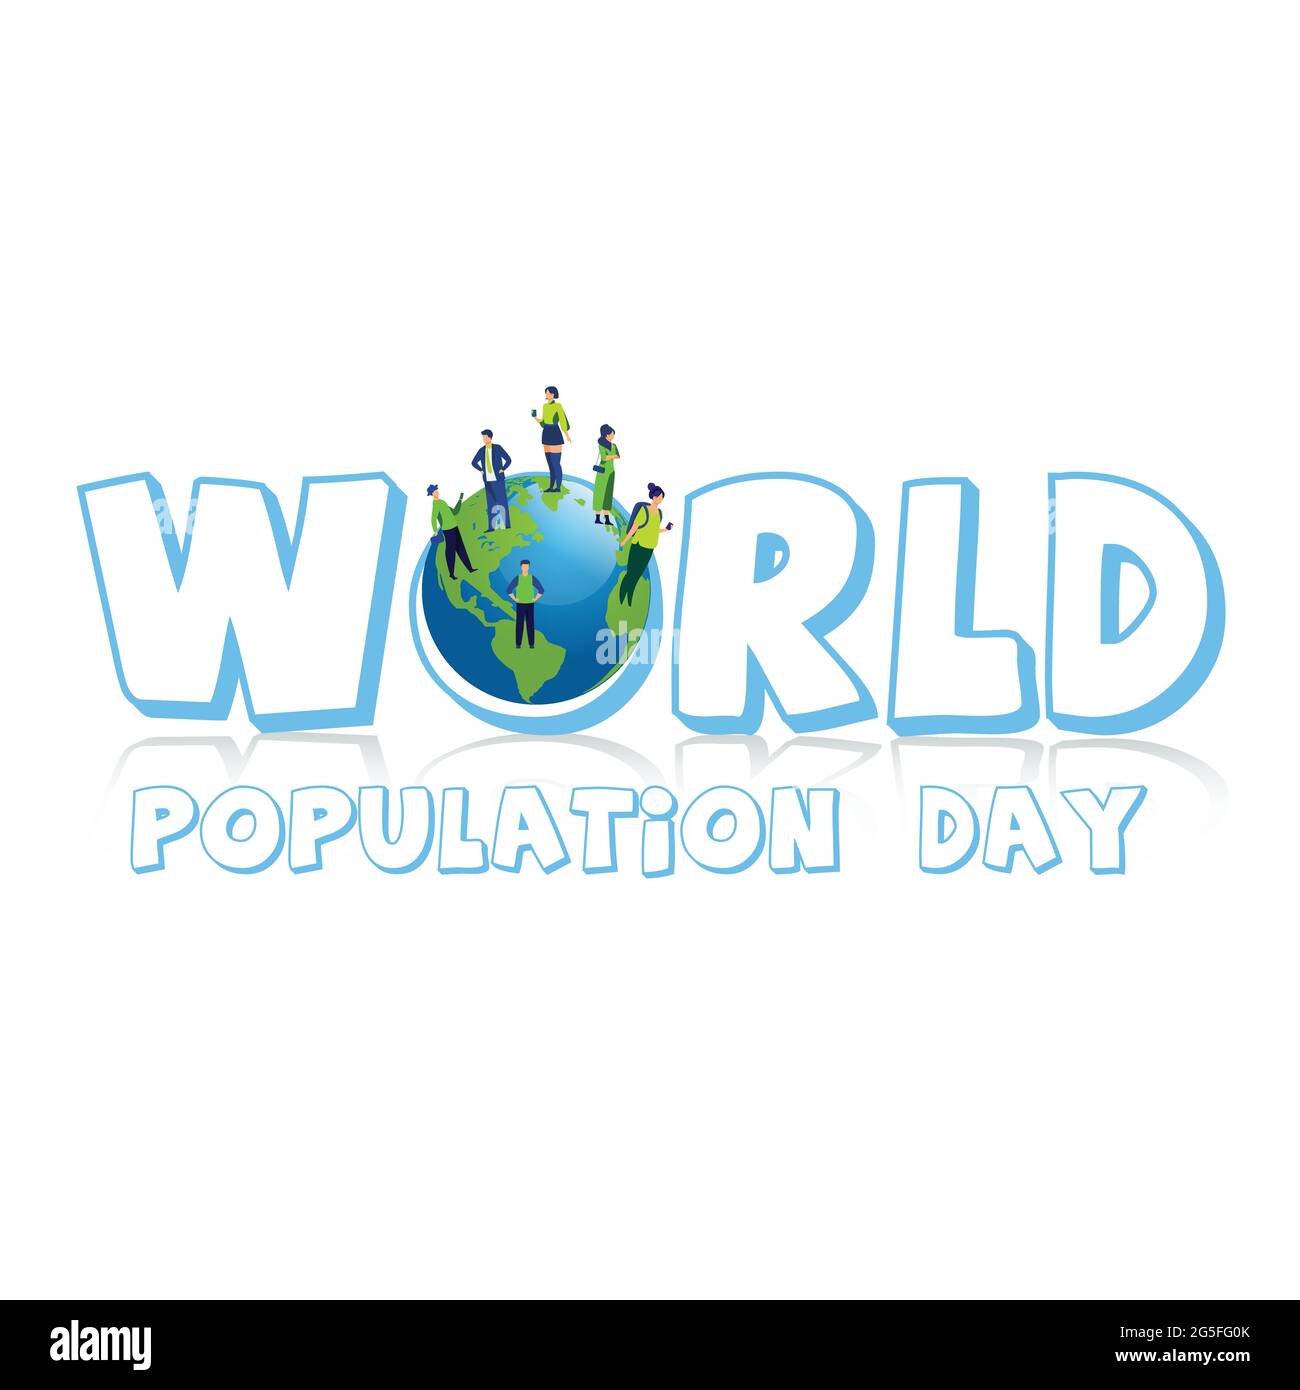 Typographical illustration of world population day. Earth is situated on earth. Many peoples are standing on earth. Stock Vector